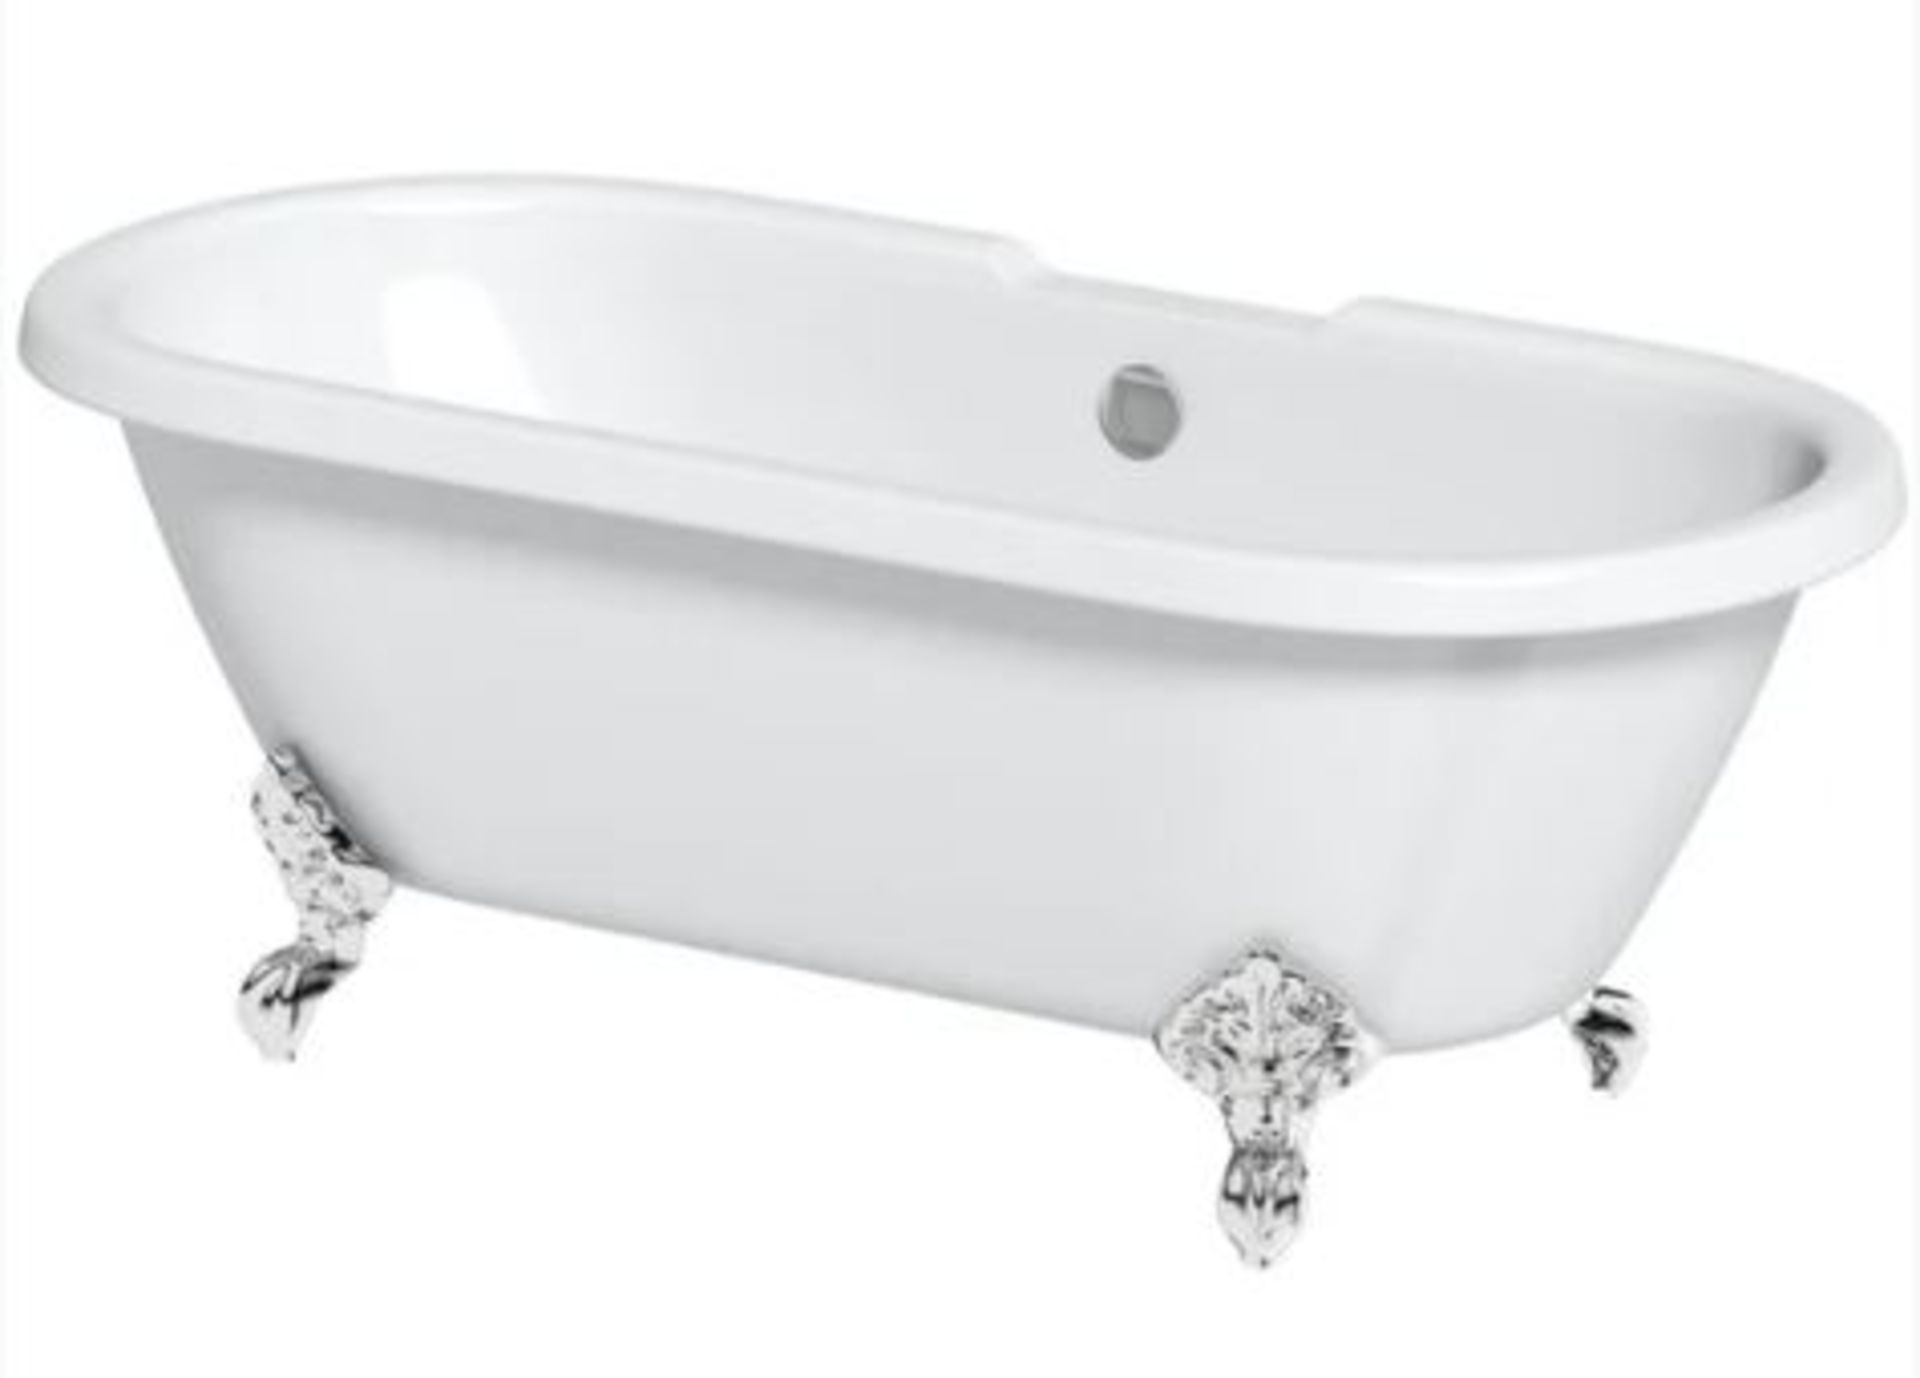 1 X Traditional Double Ended Roll Top Bath 1750 X 800 (jl659-1750) RRP £369 - Image 2 of 9